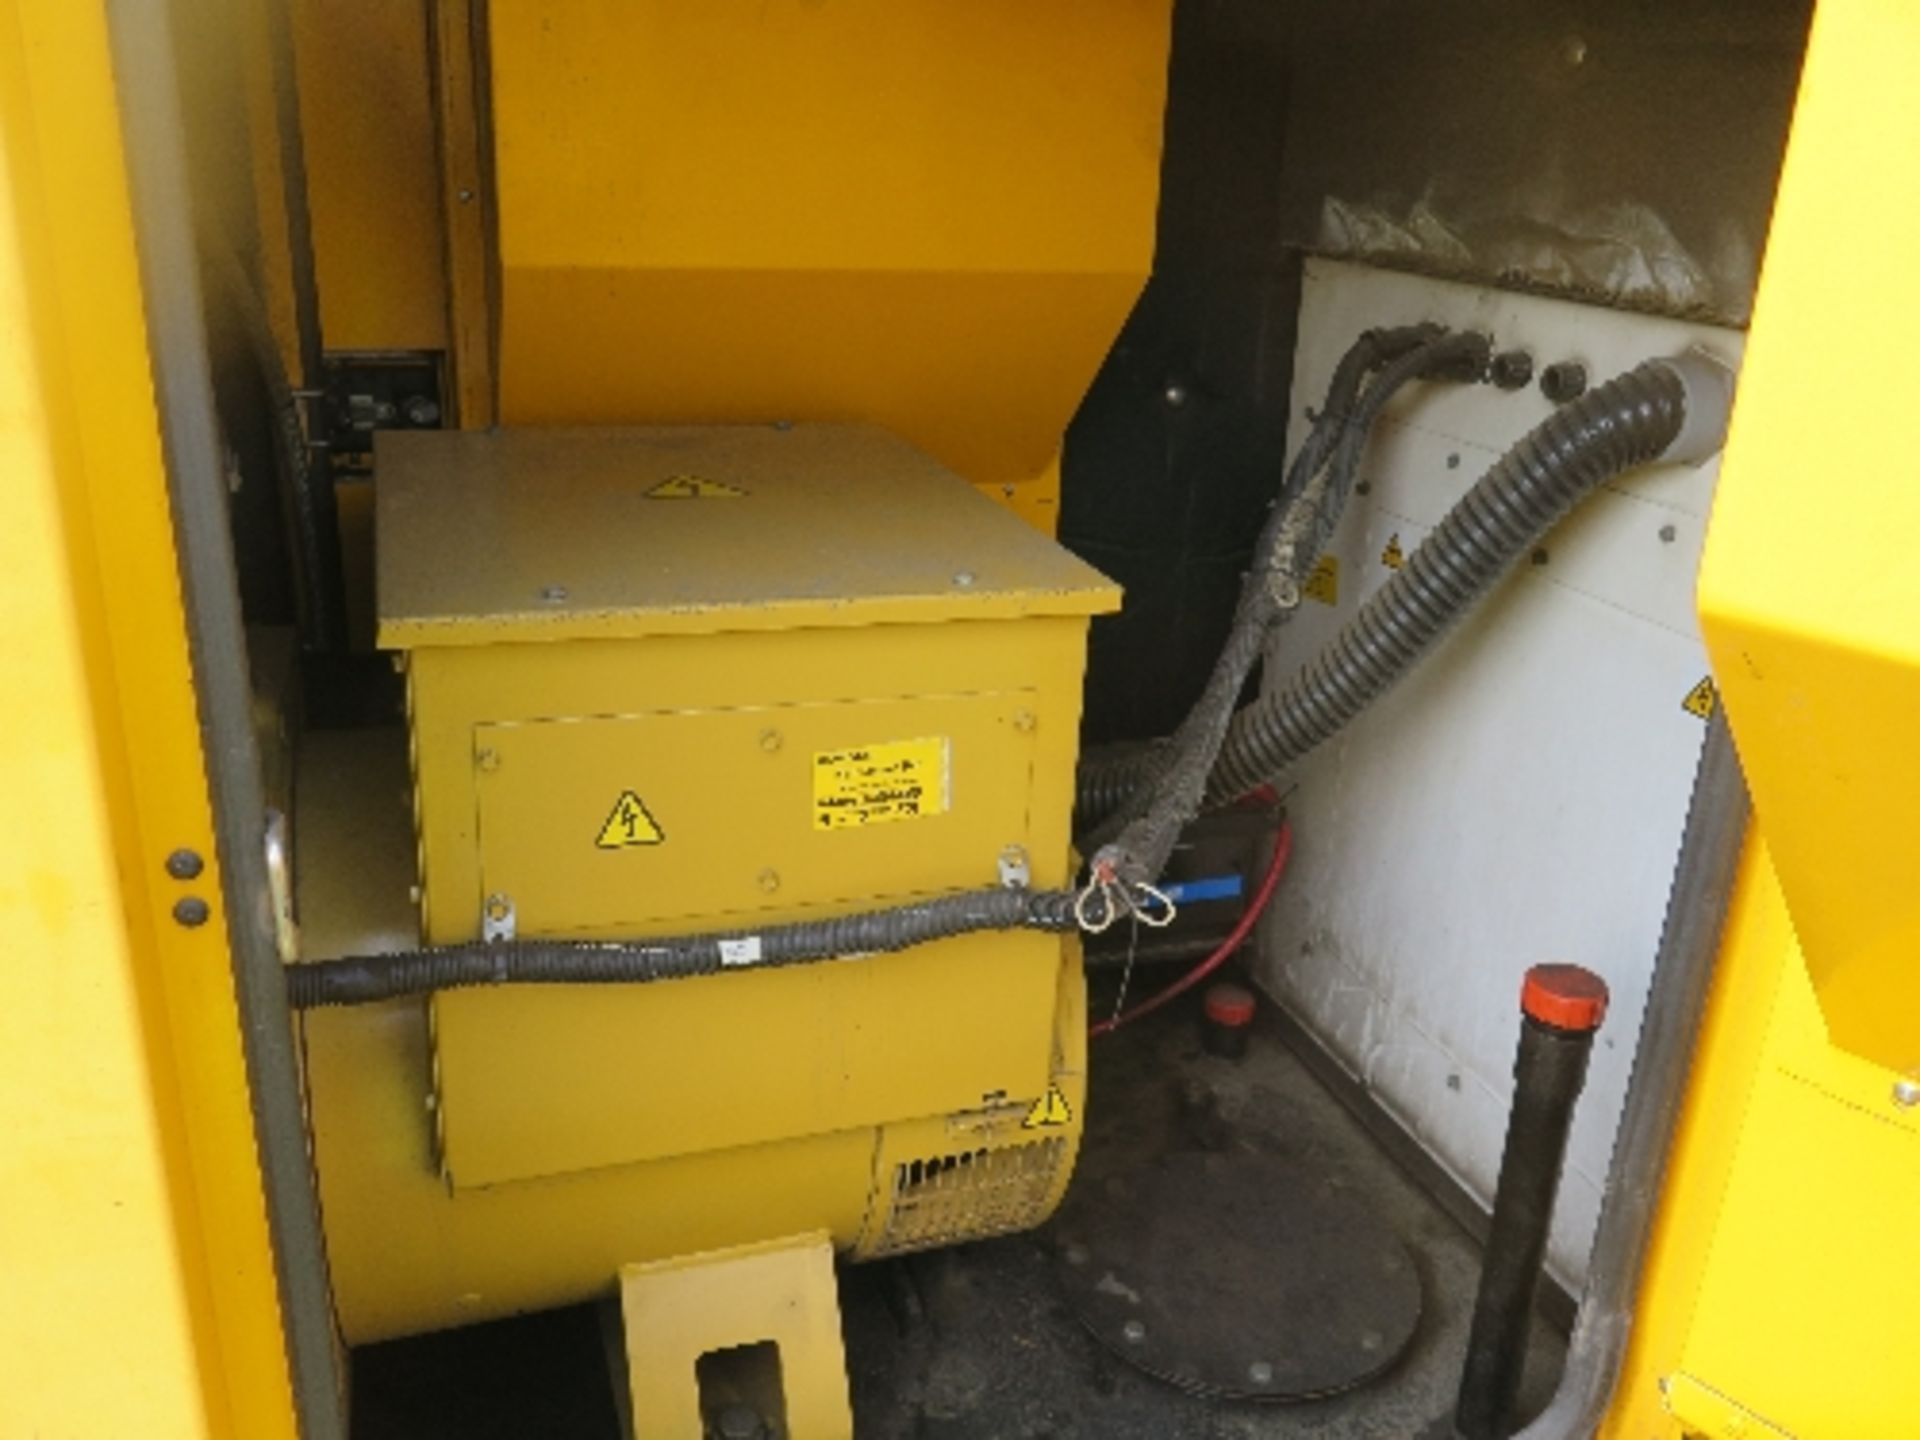 Caterpillar XQE100 generator 15066 hrs 158066
PERKINS - RUNS AND MAKES POWER
ALL LOTS are SOLD - Image 4 of 7